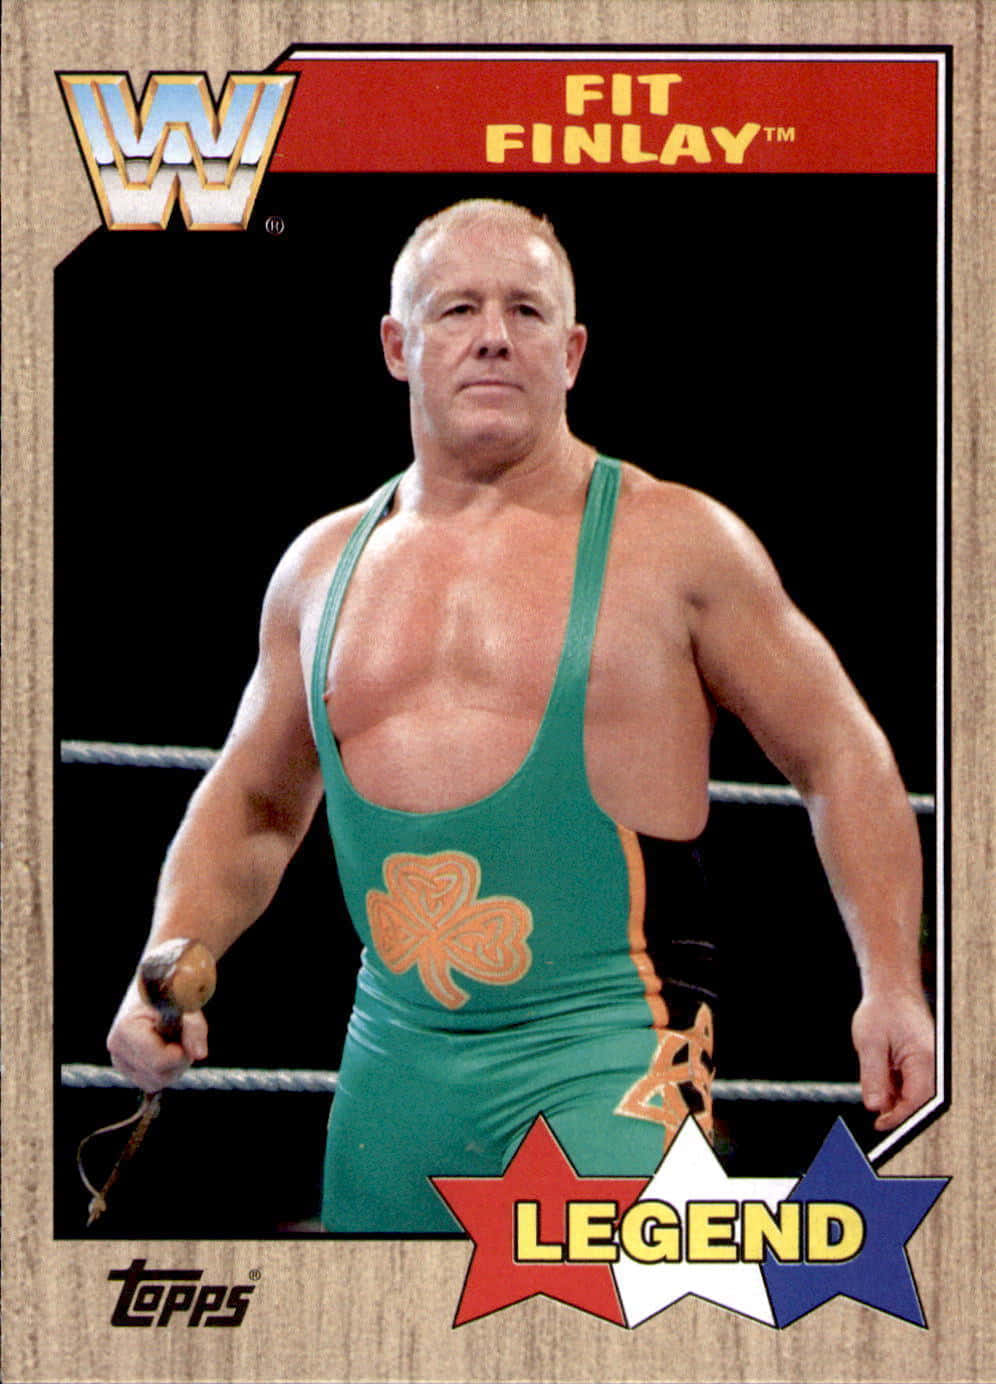 Chase 300 Piece Puzzle: Pas på Finlay 2017 WWE Heritage Wrestling Card Topps Chase 300 stykkes puslespil. Wallpaper